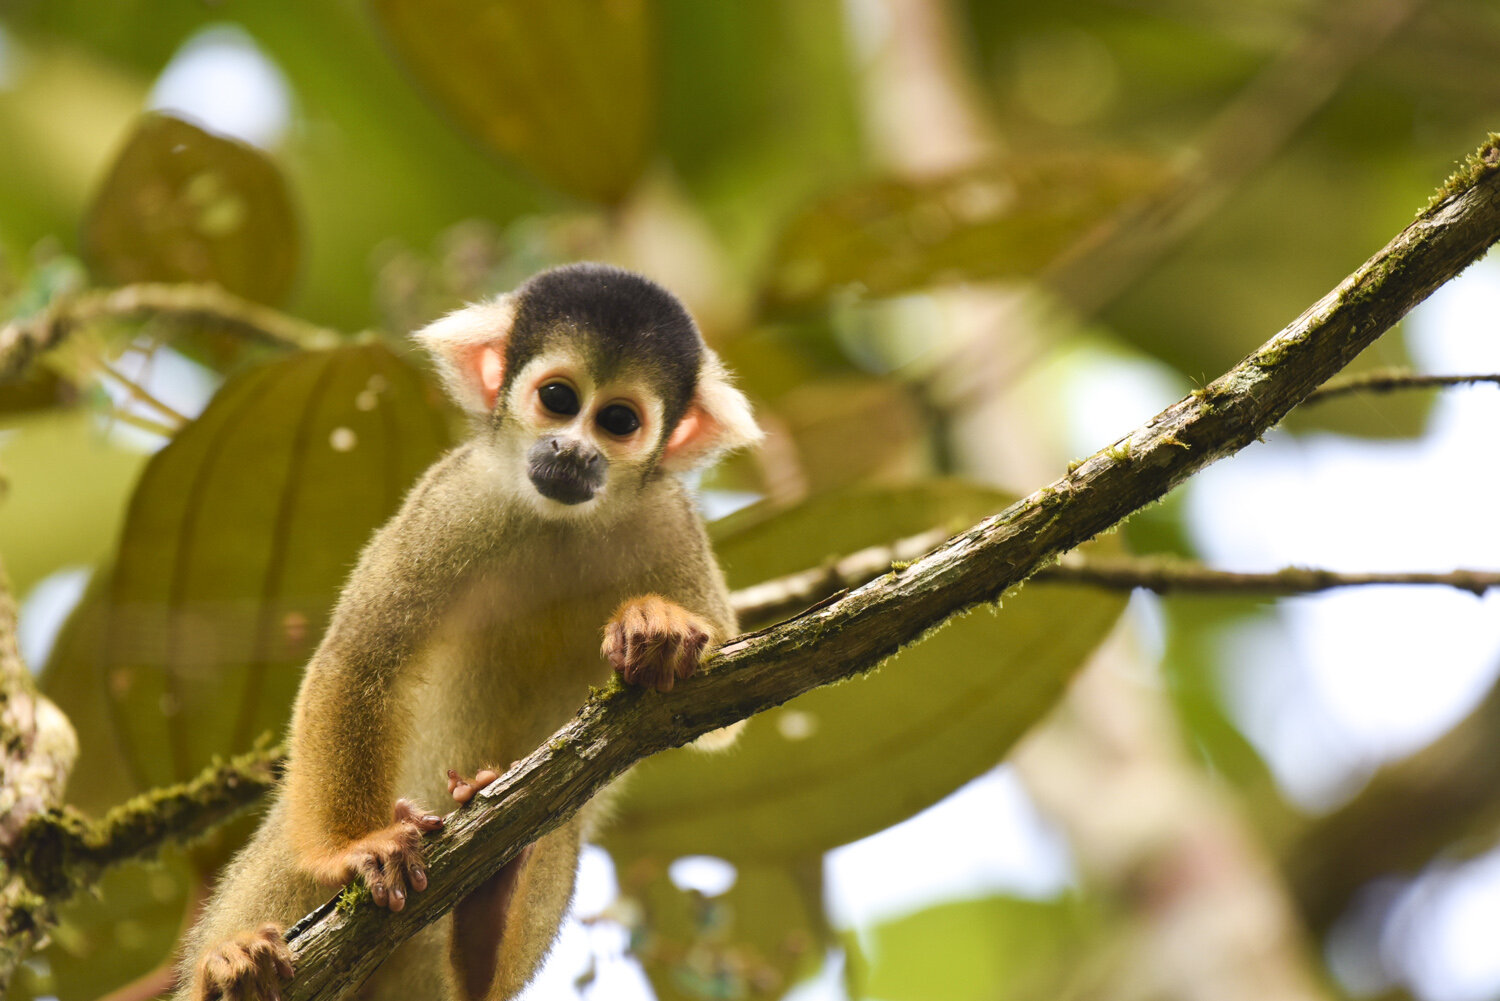  An inquisitive juvenile squirrel monkey (Saimiri boliviensis) momentarily pauses while traveling with its large family group of 70+ individuals through the forests of Manu Leaning Centre, Peru. 